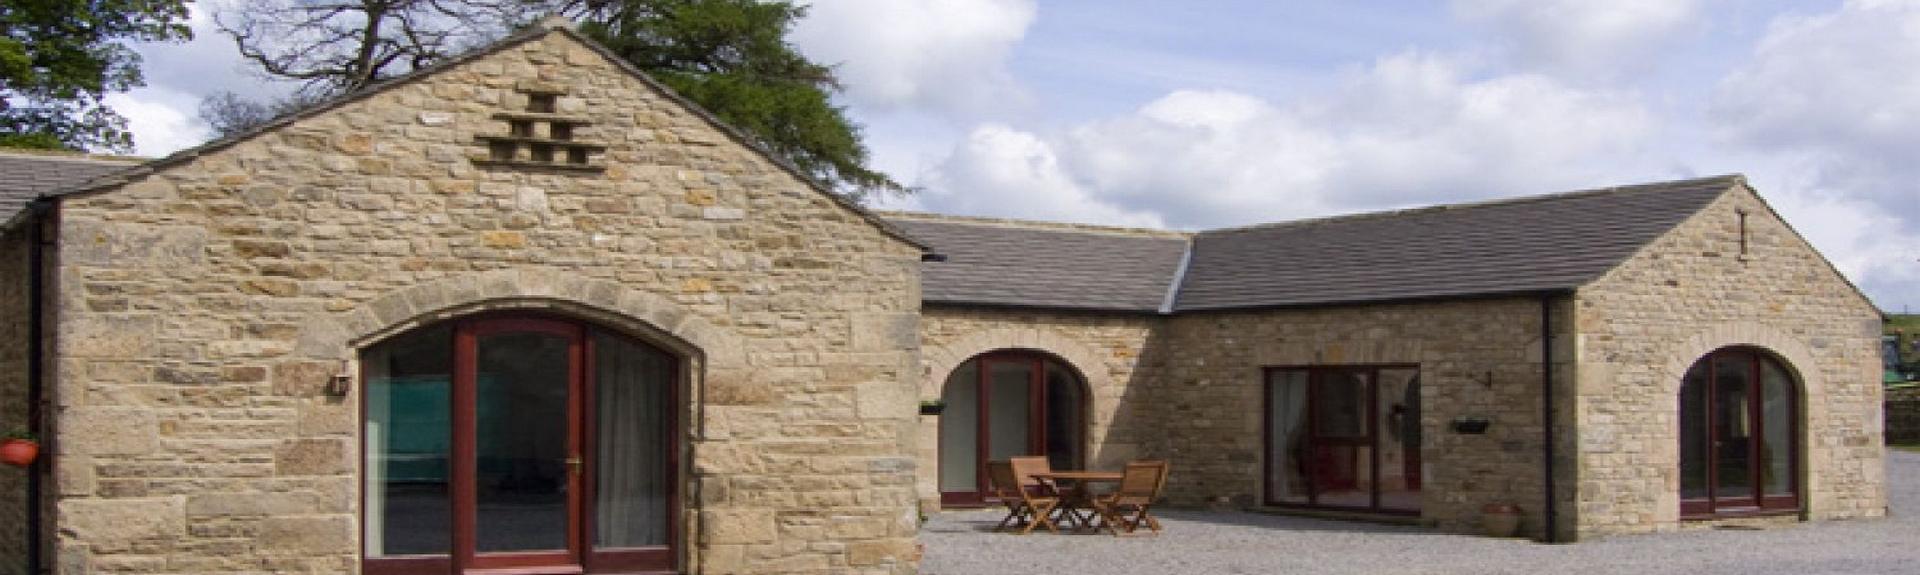 A U-shaped, stone barn conversion with floor-to-ceeiing windows looks out over a large shingled courtyard.